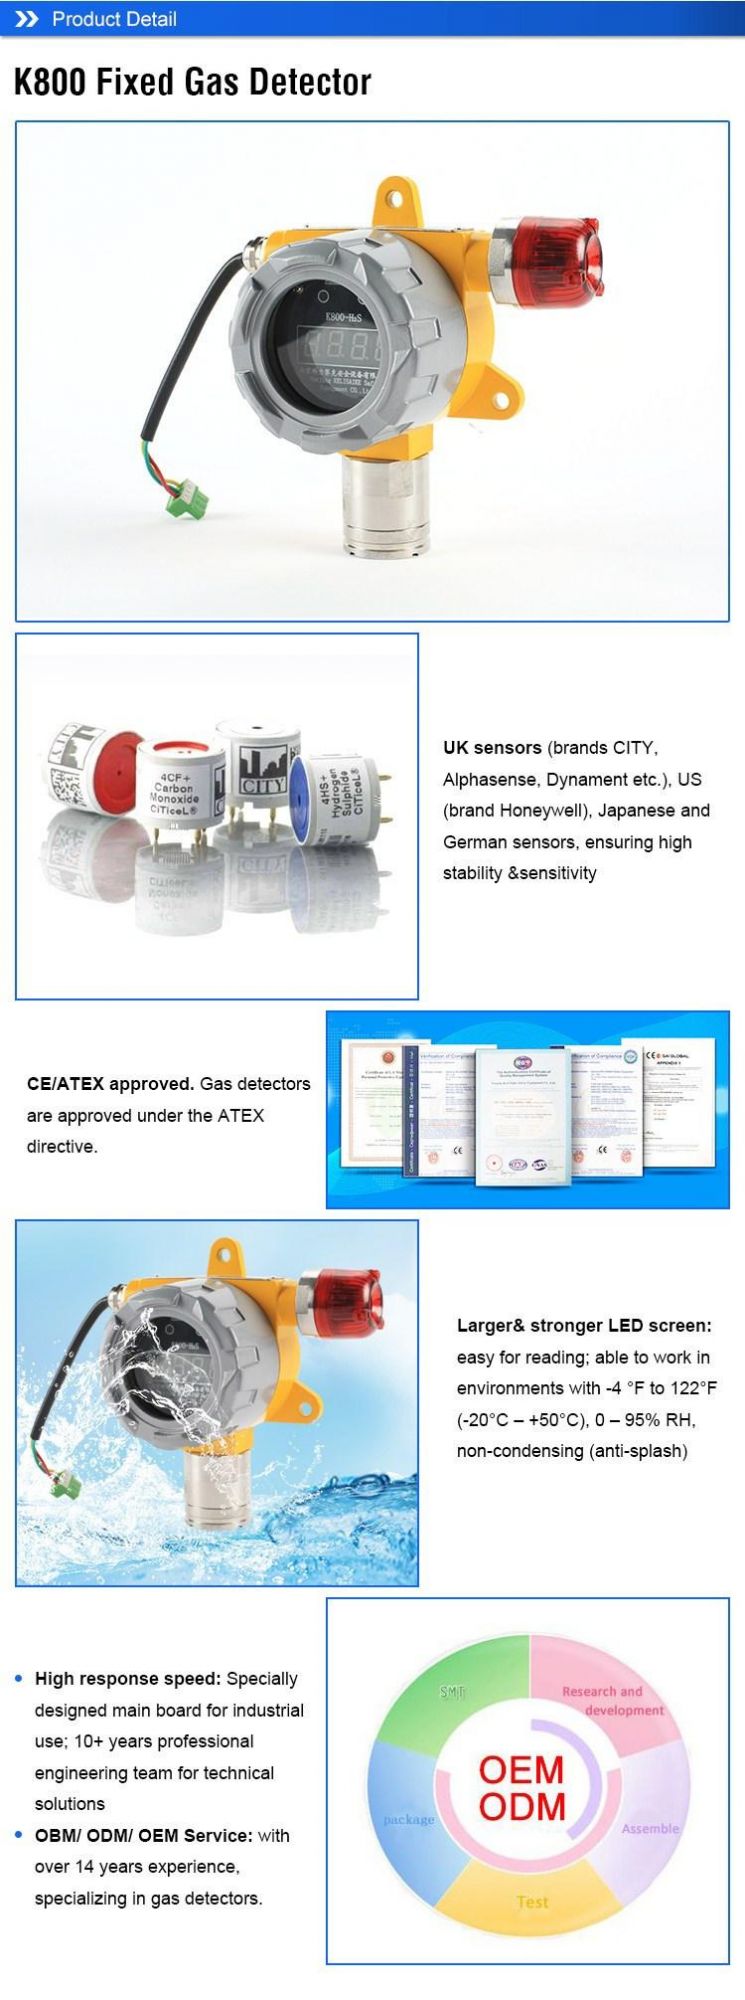 Explosion-Proof Design Fixed Gas Detector with Light and Sound Alarm